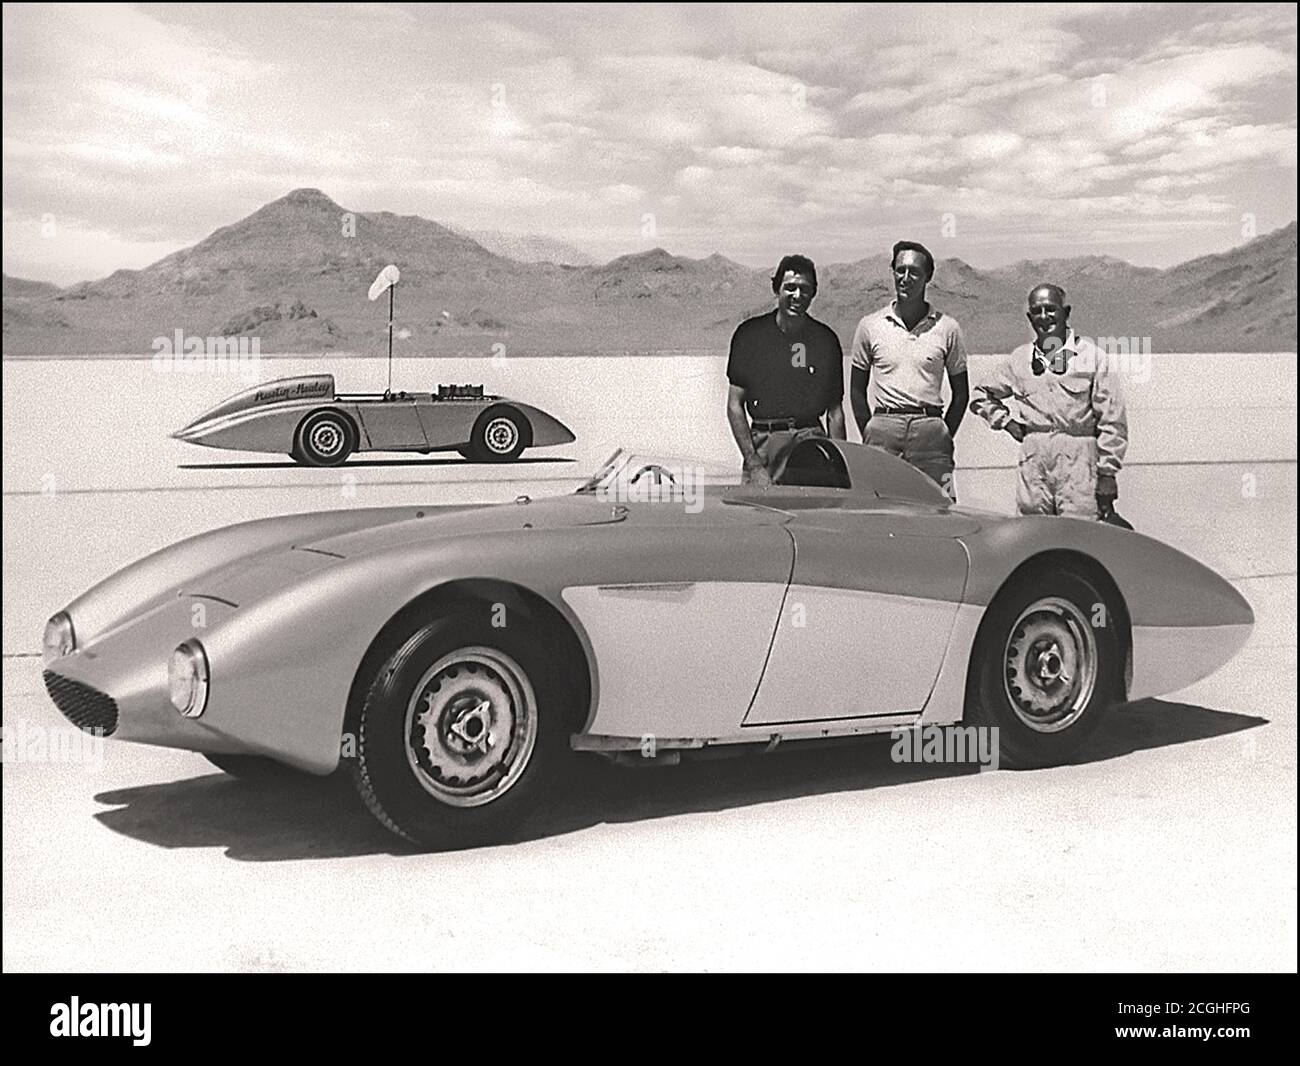 Austin Healey 100-6  Speed Record Car,  Carroll Shelby,  Roy Jackson Moore & Donald Healey taken immediately after the speed record had been broken On August 23rd, 1954 at the famed Bonneville Salt Flats in Utah, a factory-prepared Austin-Healey set 83 National and International Class D records driven by Donald Healey, George Eyston, Carroll Shelby, Mort Goodall and Roy Jackson-Moore, including a 24-hour average speed of 132.81 mph Stock Photo